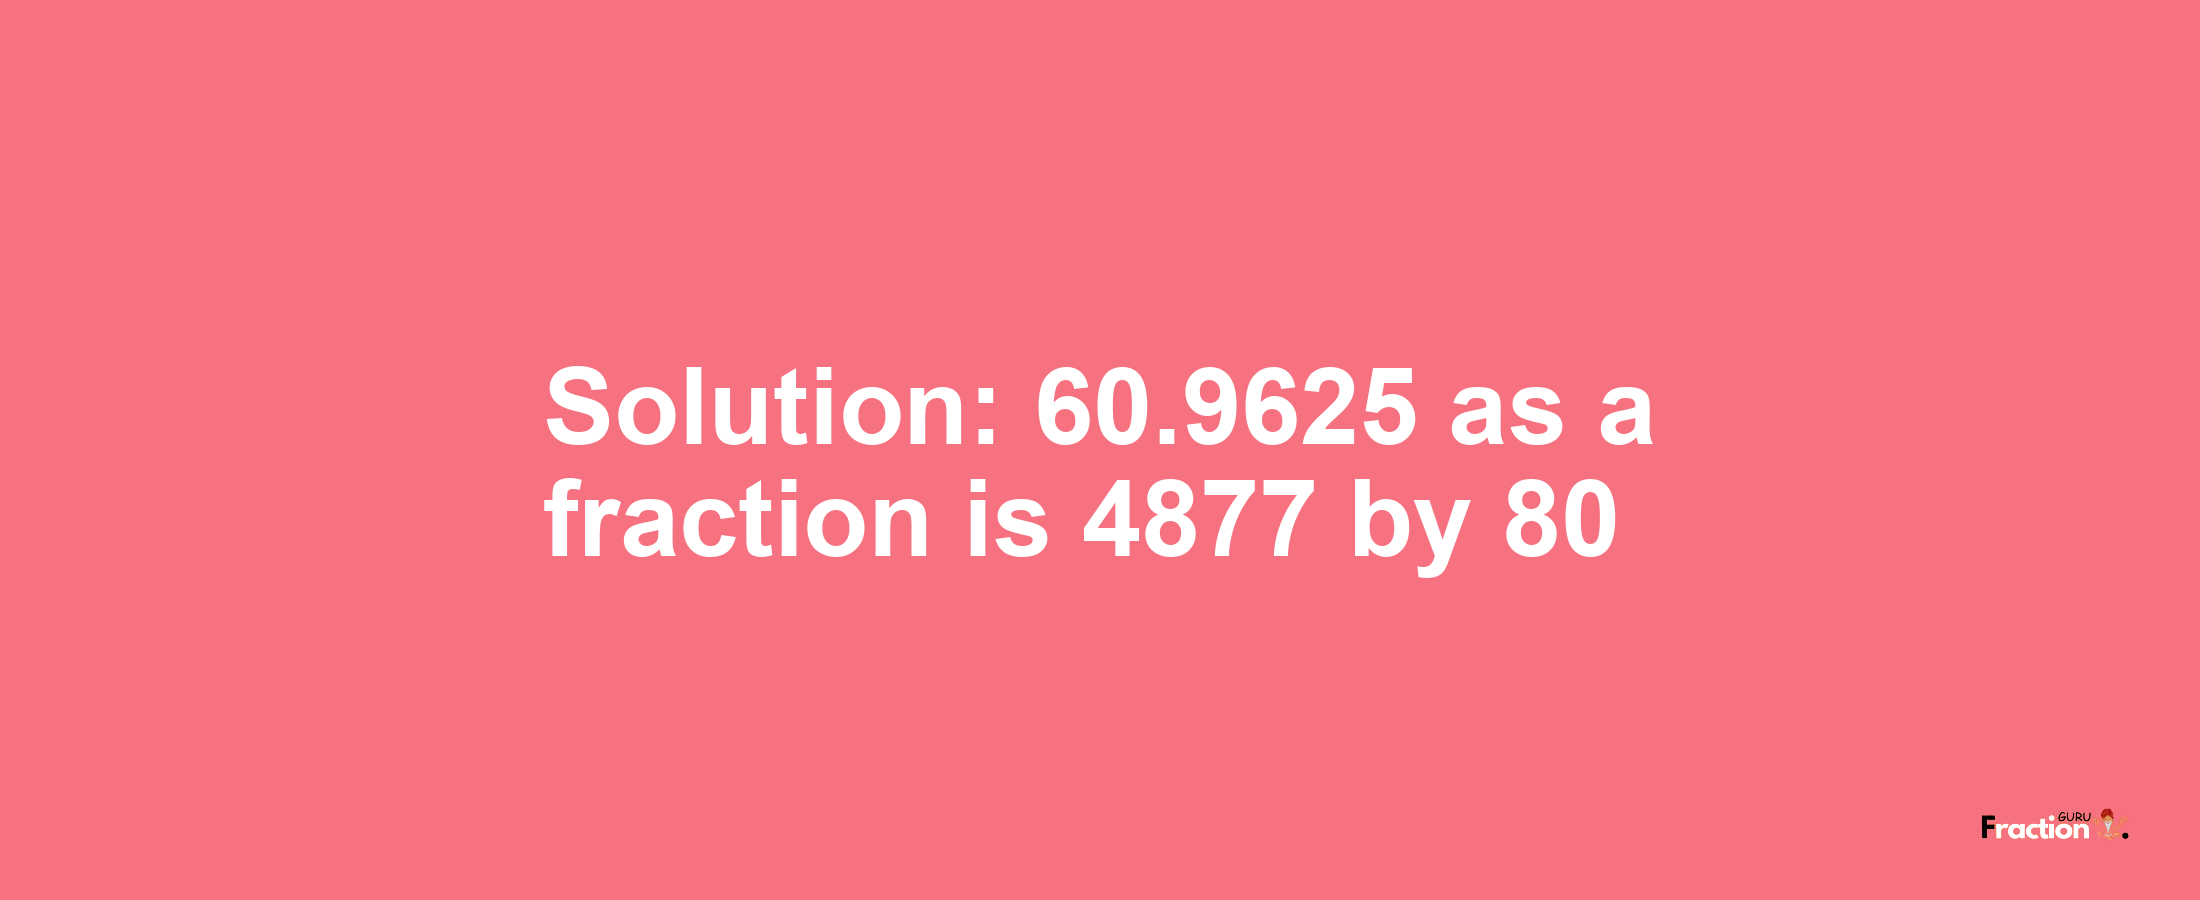 Solution:60.9625 as a fraction is 4877/80